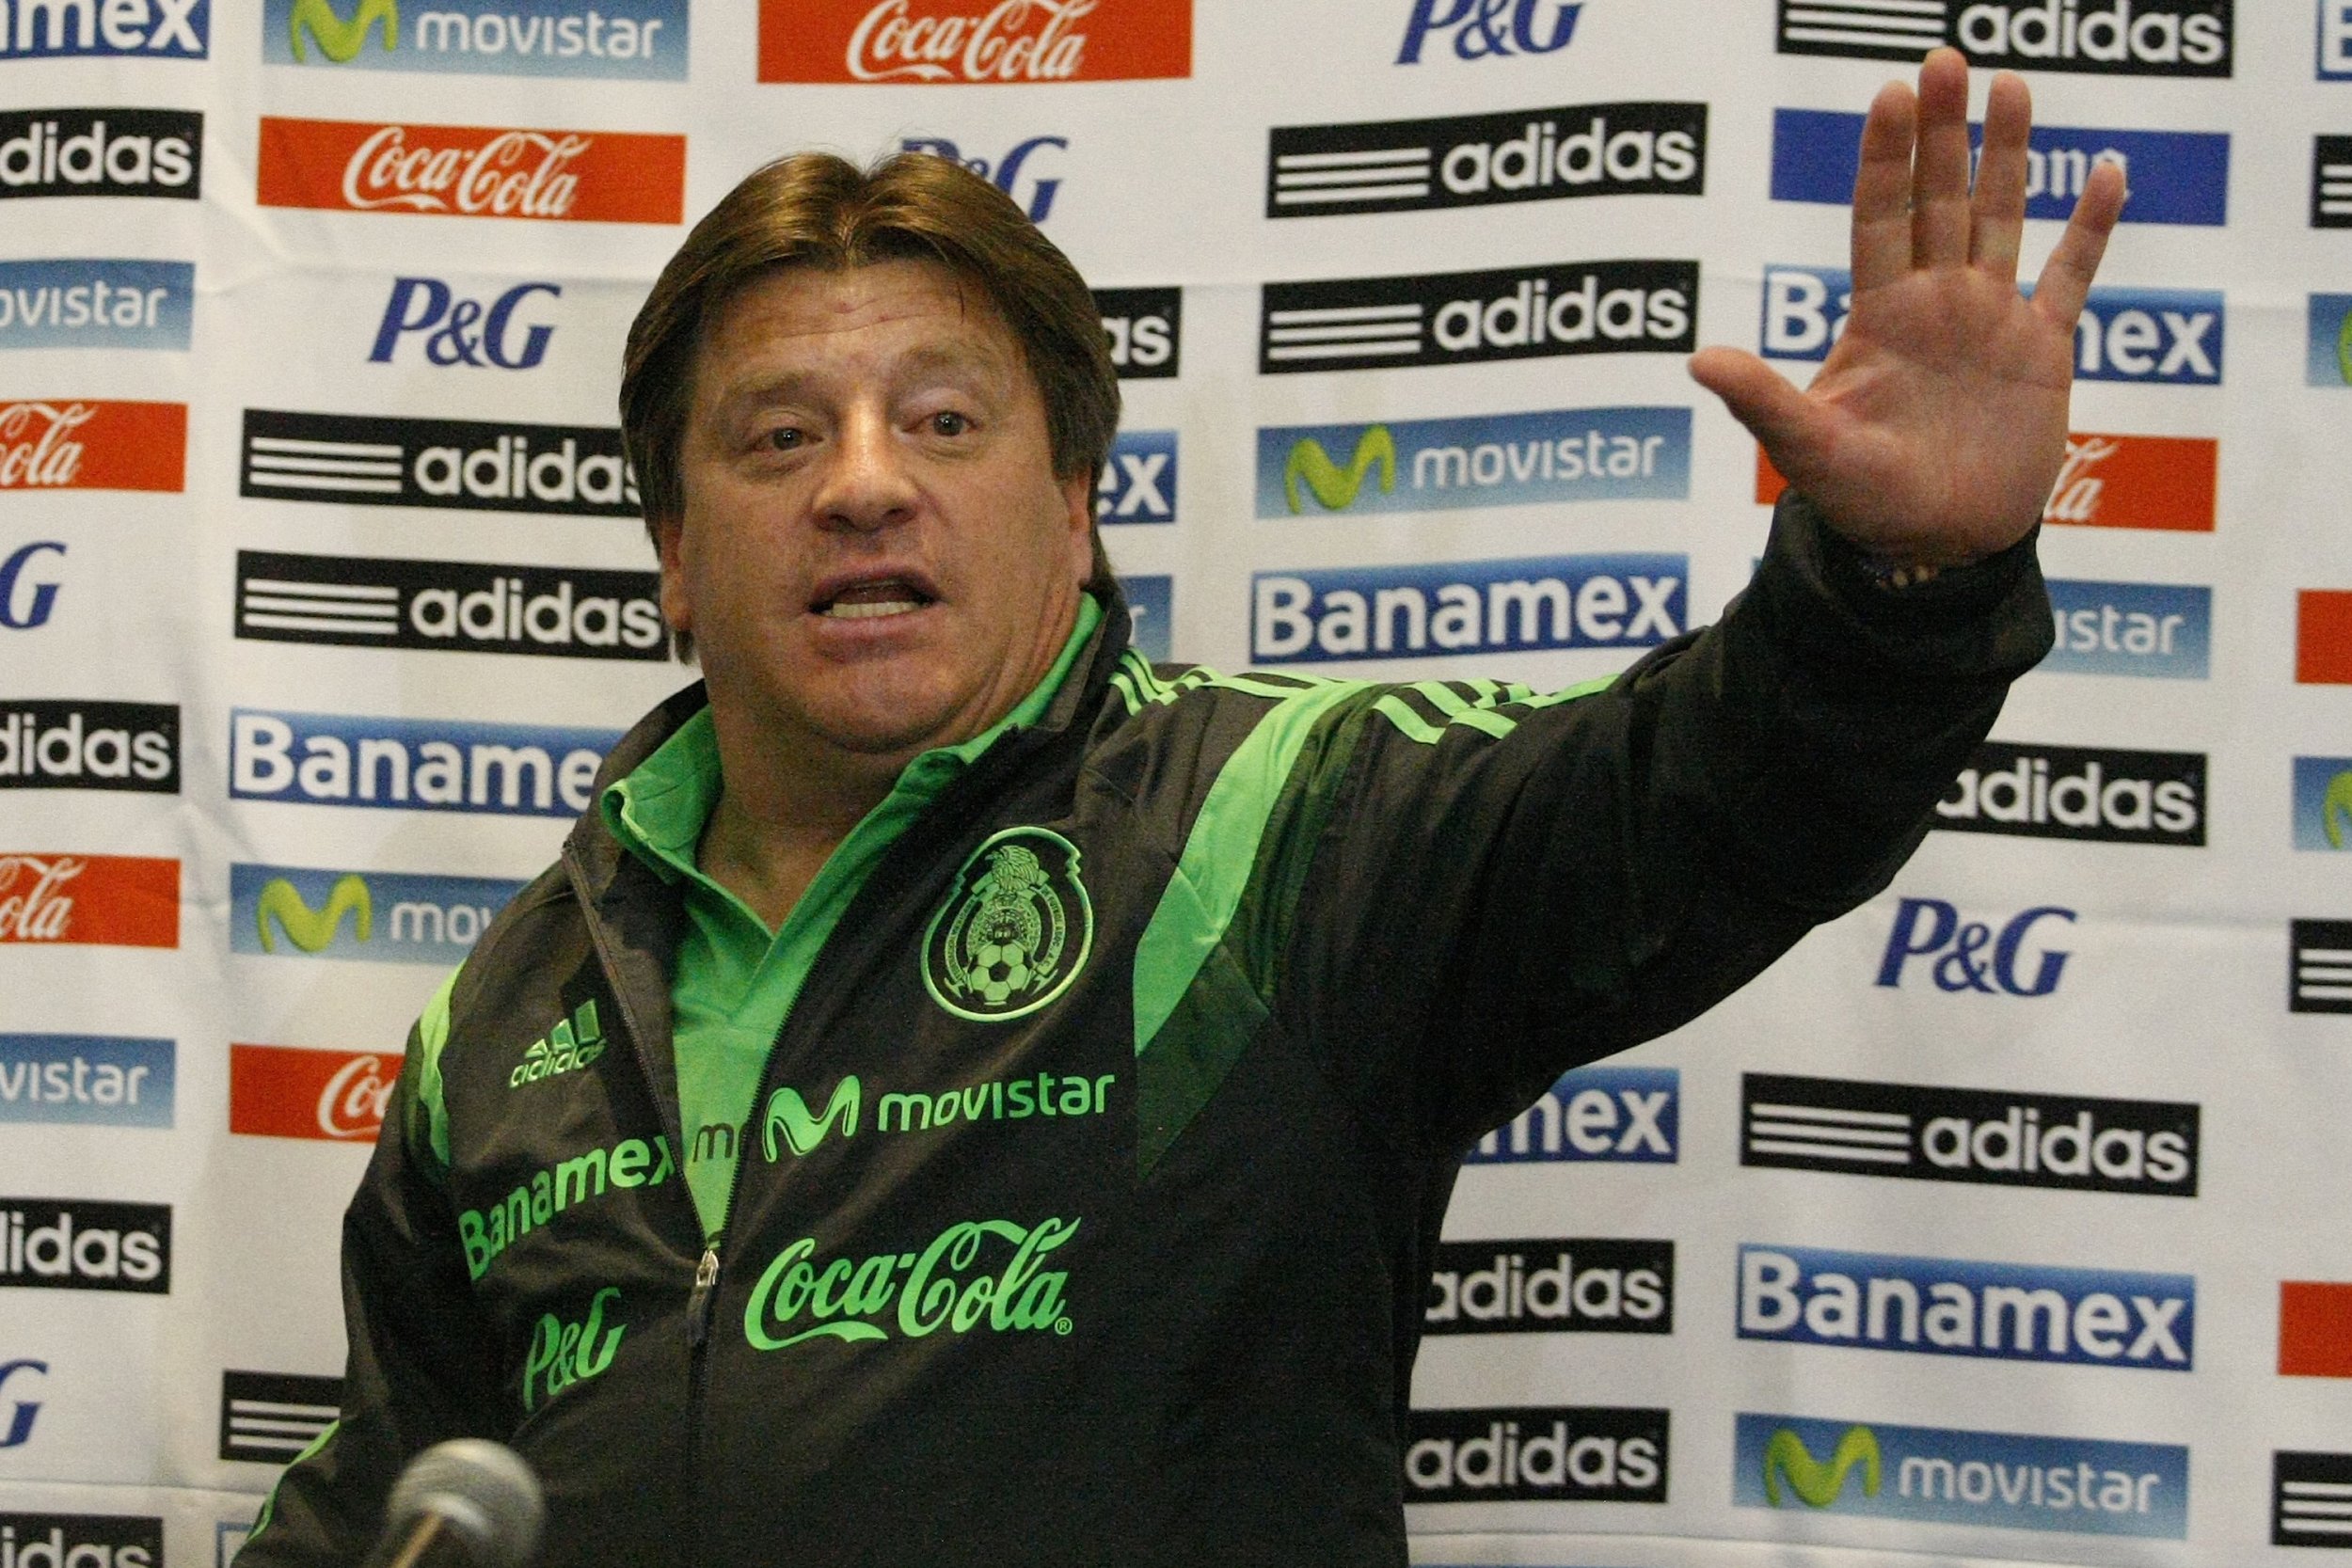 Mexico Soccer Team 2015 Schedule, News, Preview For El Tri, Including